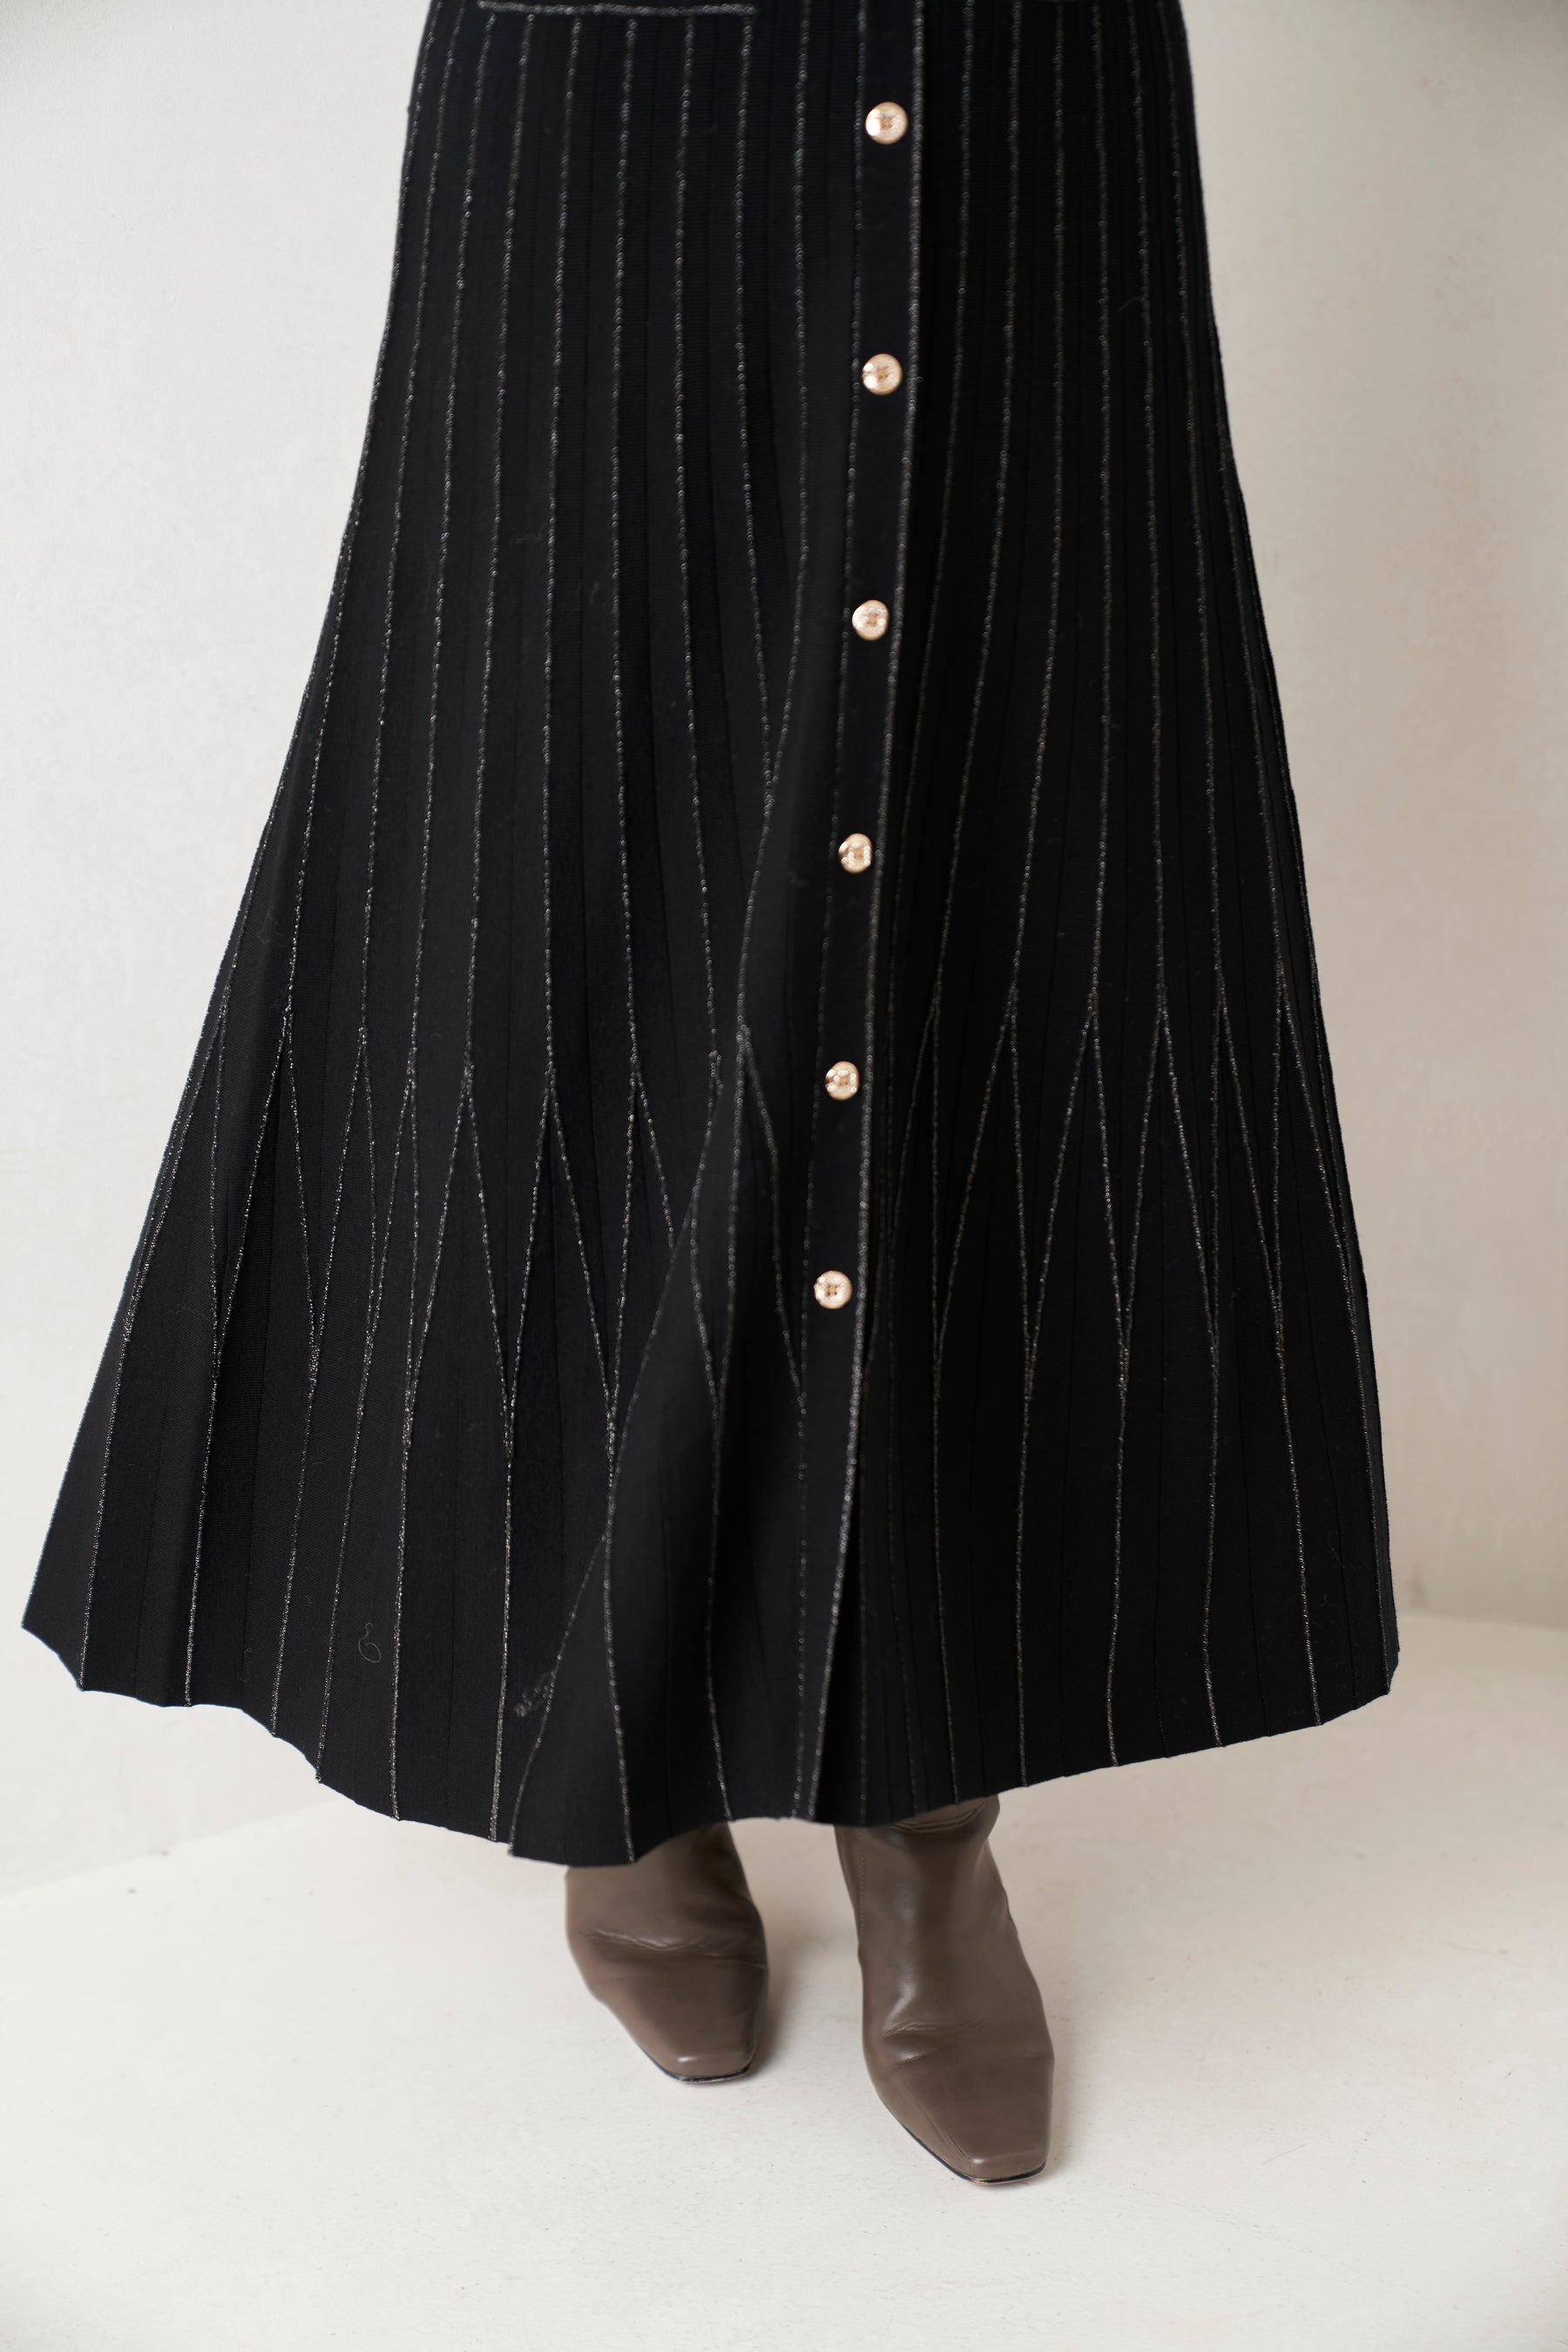 ★ Suite Room Knit Long Dressカラーピンク